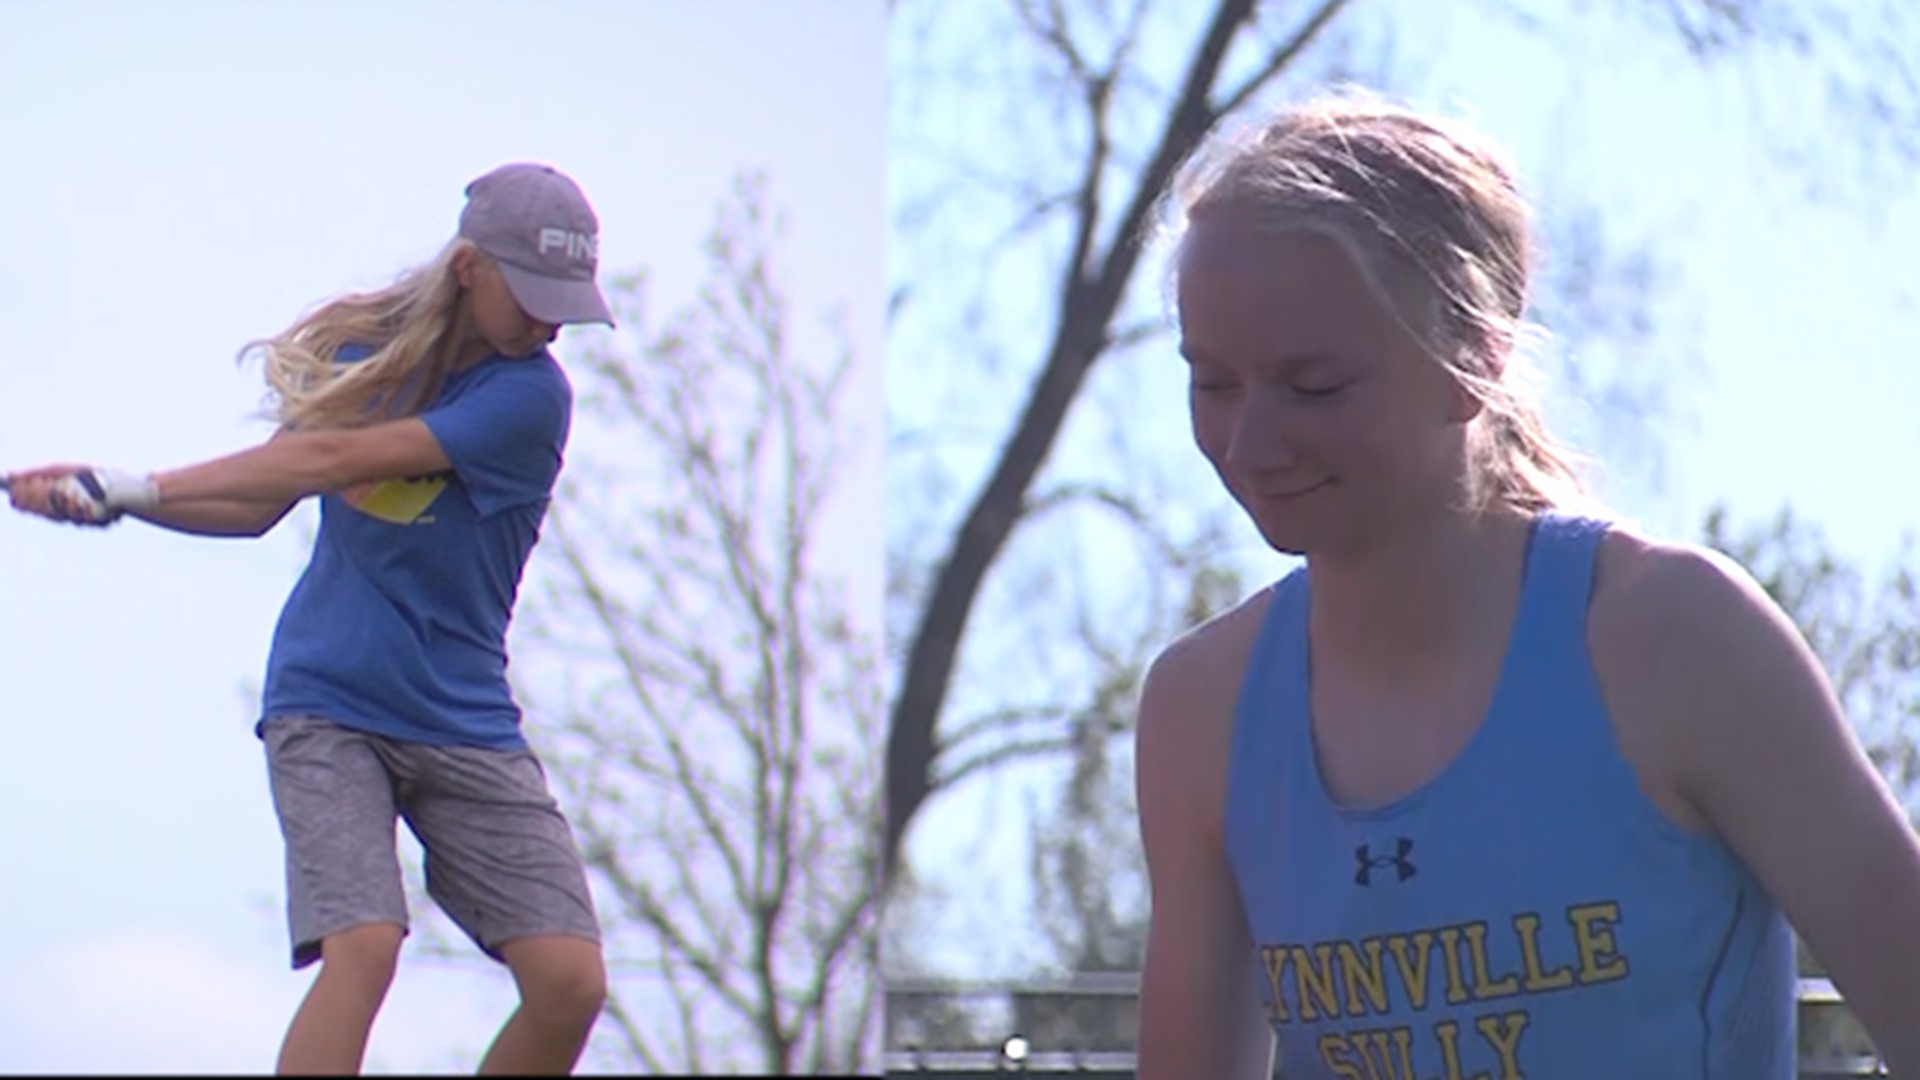 Greenlee Smock has shown she's one of the best distance runners and golfers in class 1A this season. Matthew Judy explains how she pulls off the spring balancing act